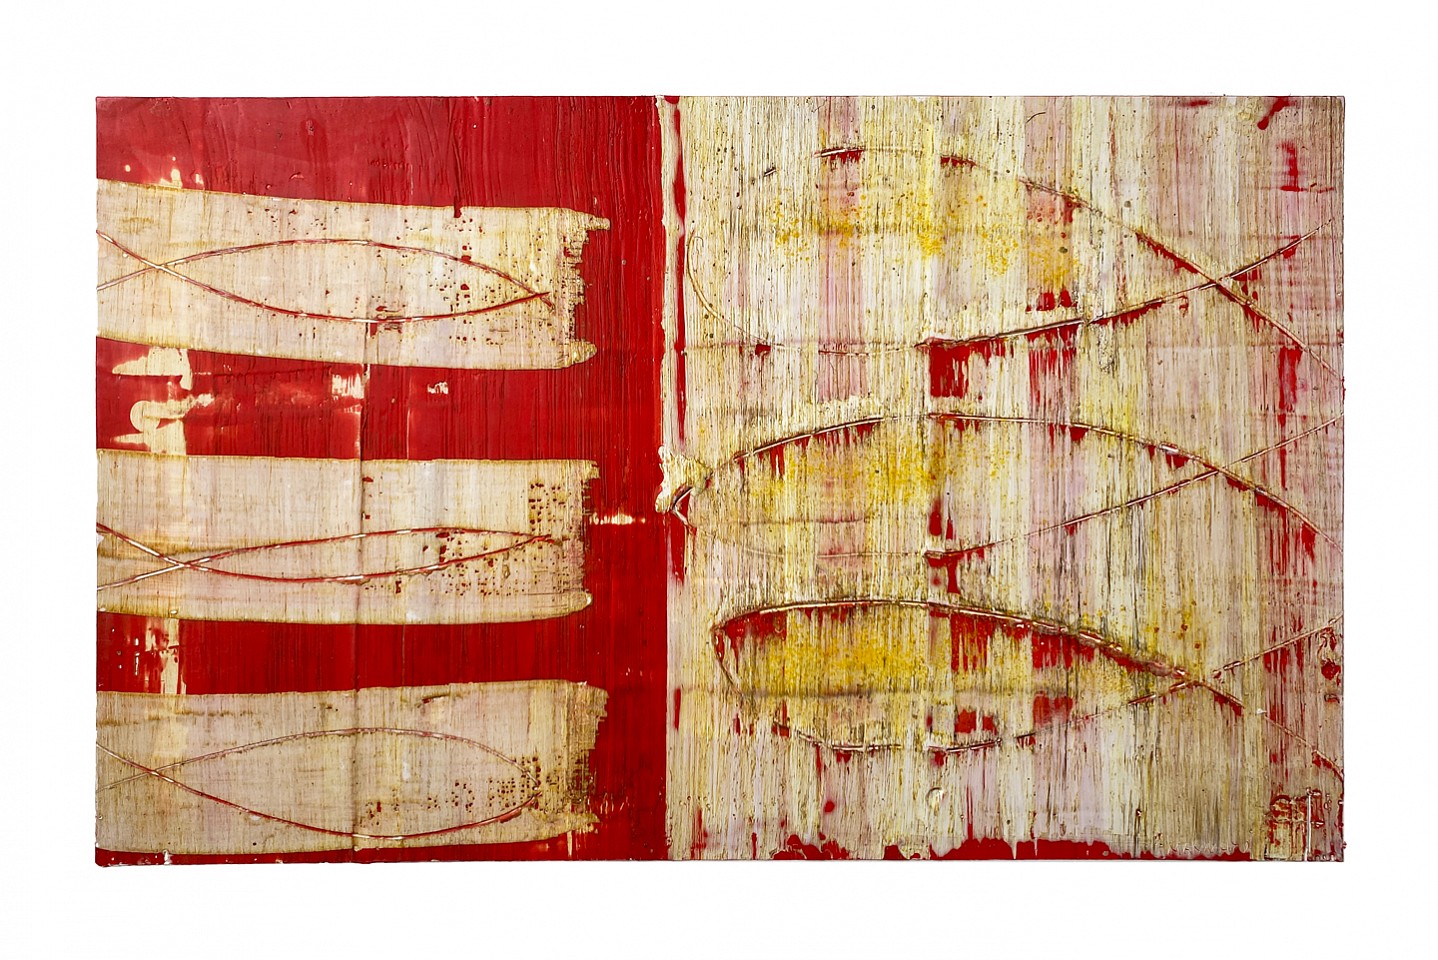 Don Maynard
In the pursuit of happiness, 2018
MAY394
encaustic on paper, 22 x 30 inch paper / 12 x 20 inch image